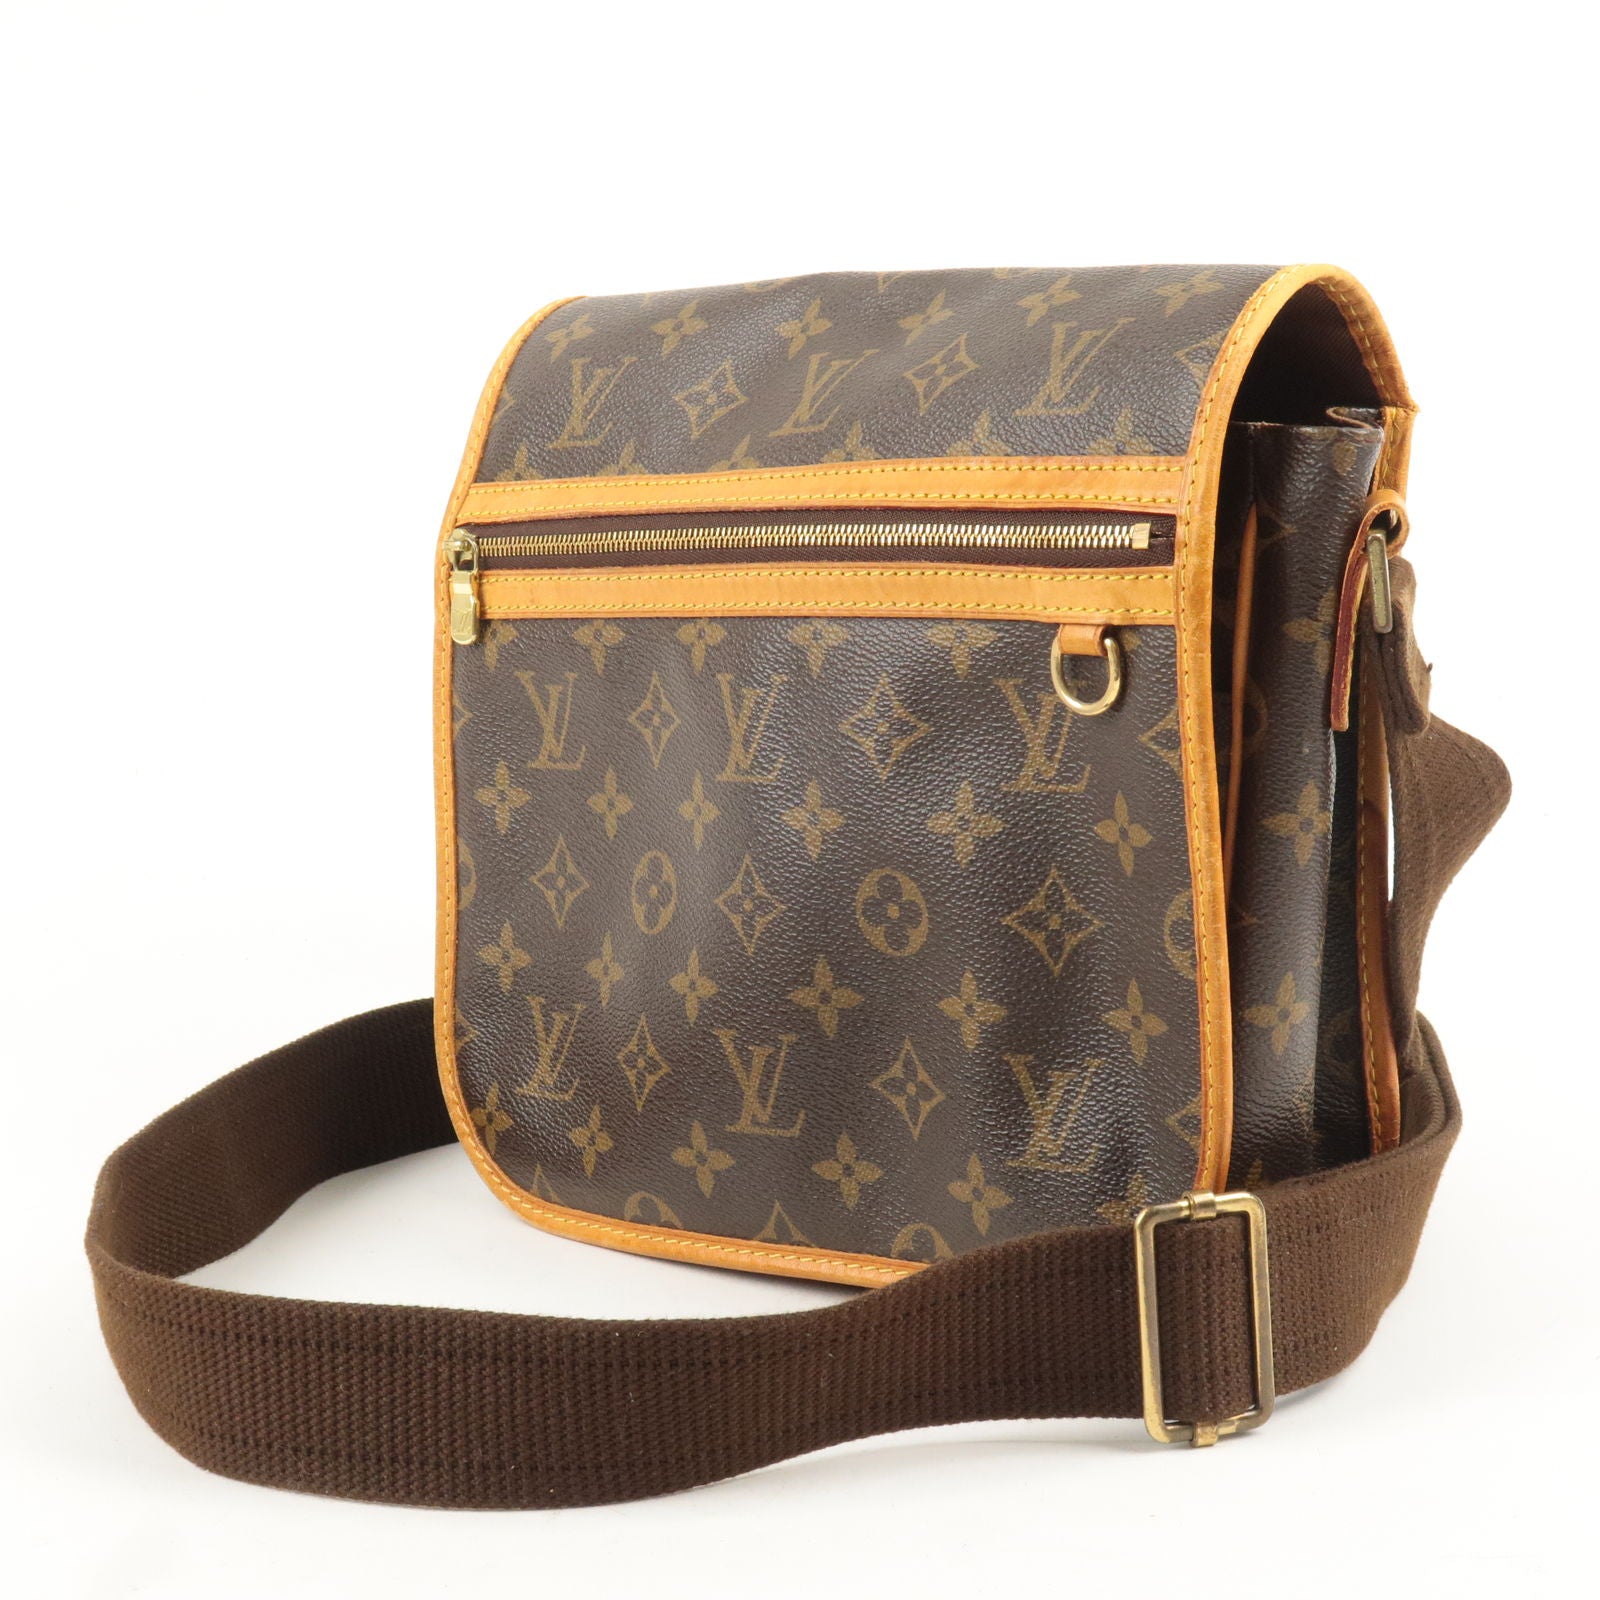 Shop for Louis Vuitton Monogram Canvas Leather Bosphore Messenger PM Handbag  - Shipped from USA